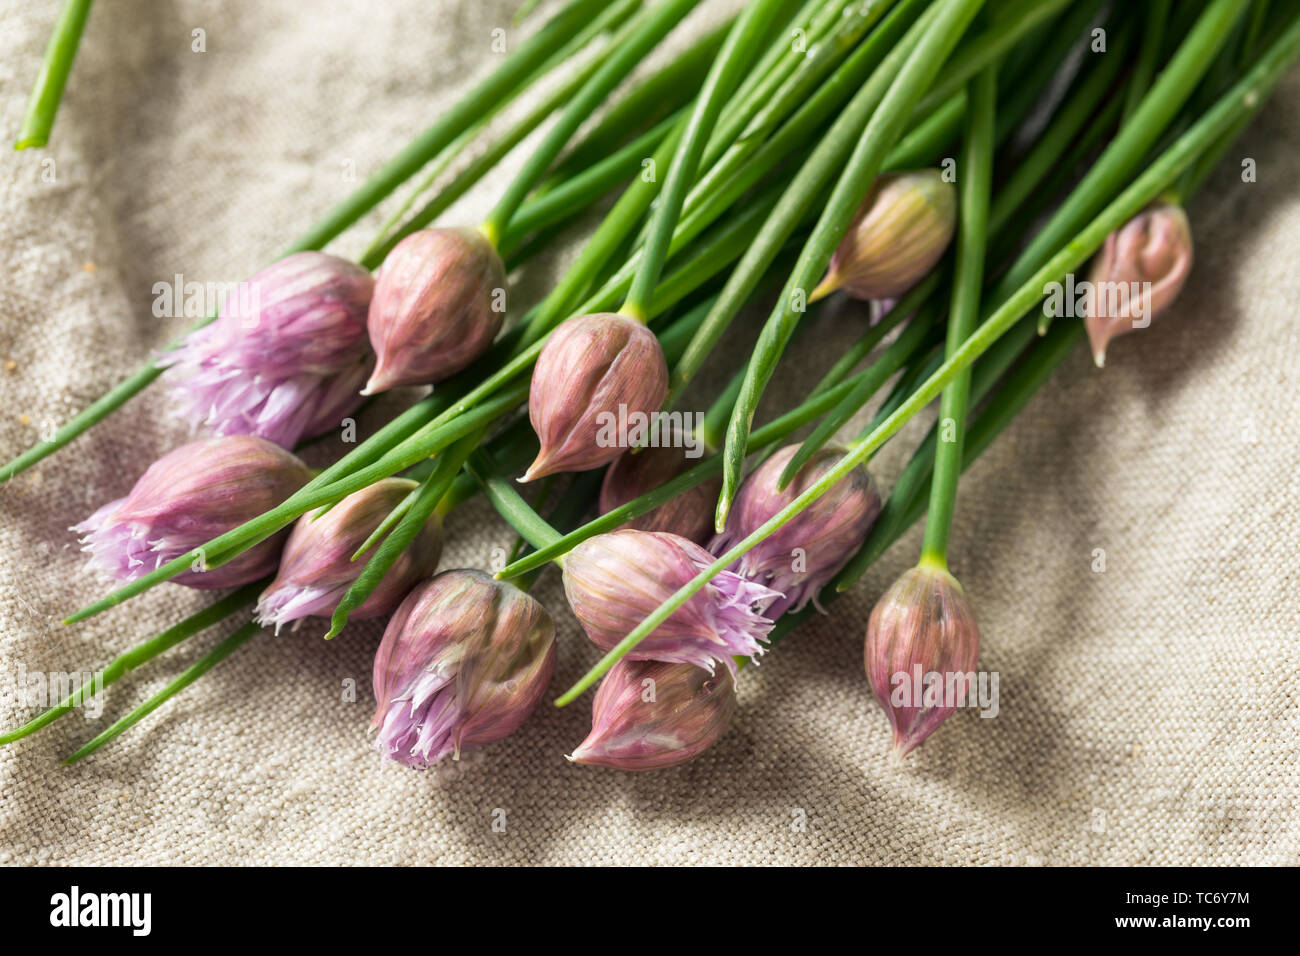 Raw Green Organic Flowering Chives Ready to Cook With Stock Photo